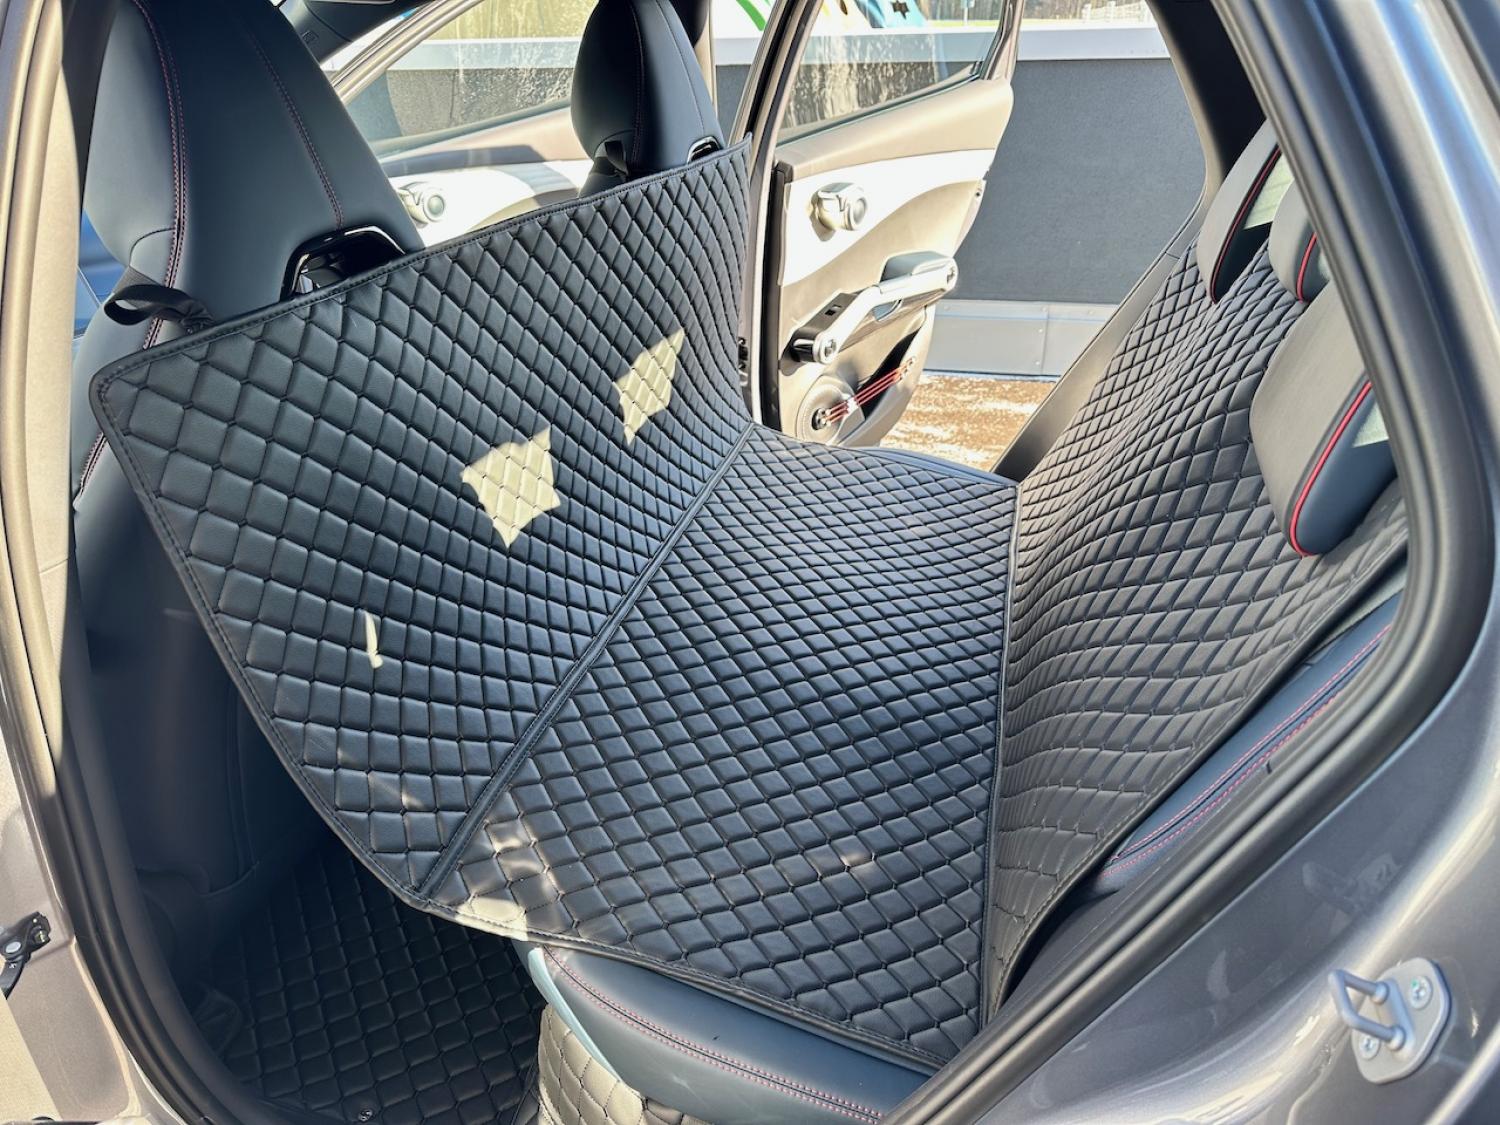 CARSTYLER® Back Seat Cover Geeignet Für Audi A3 8P 2003-2013